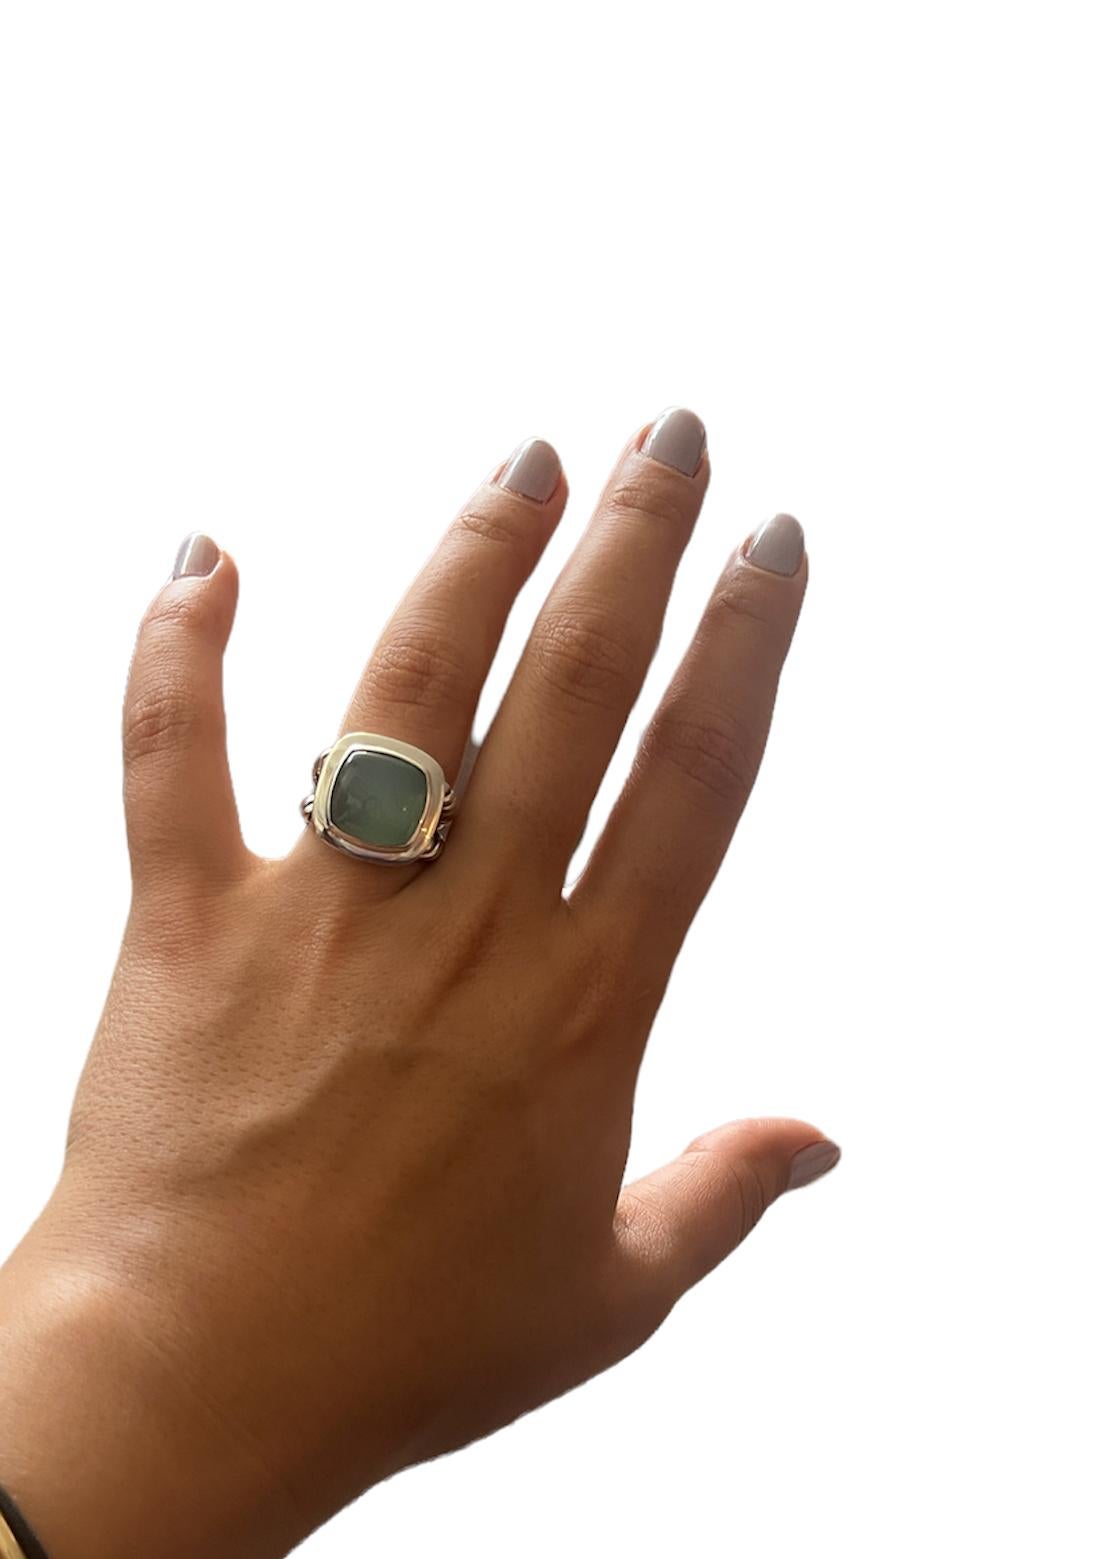 David Yurman Sterling Silver Chalcedony Albion Ring sz 7

Materials: Sterling silver and chalcedony
Hallmarks: DY 925
Overall Condition: Excellent pre-owned
Estimated Retail: $750 plus tax
Includes: David Yurman dustbag

Size: 7 
Band Width:.